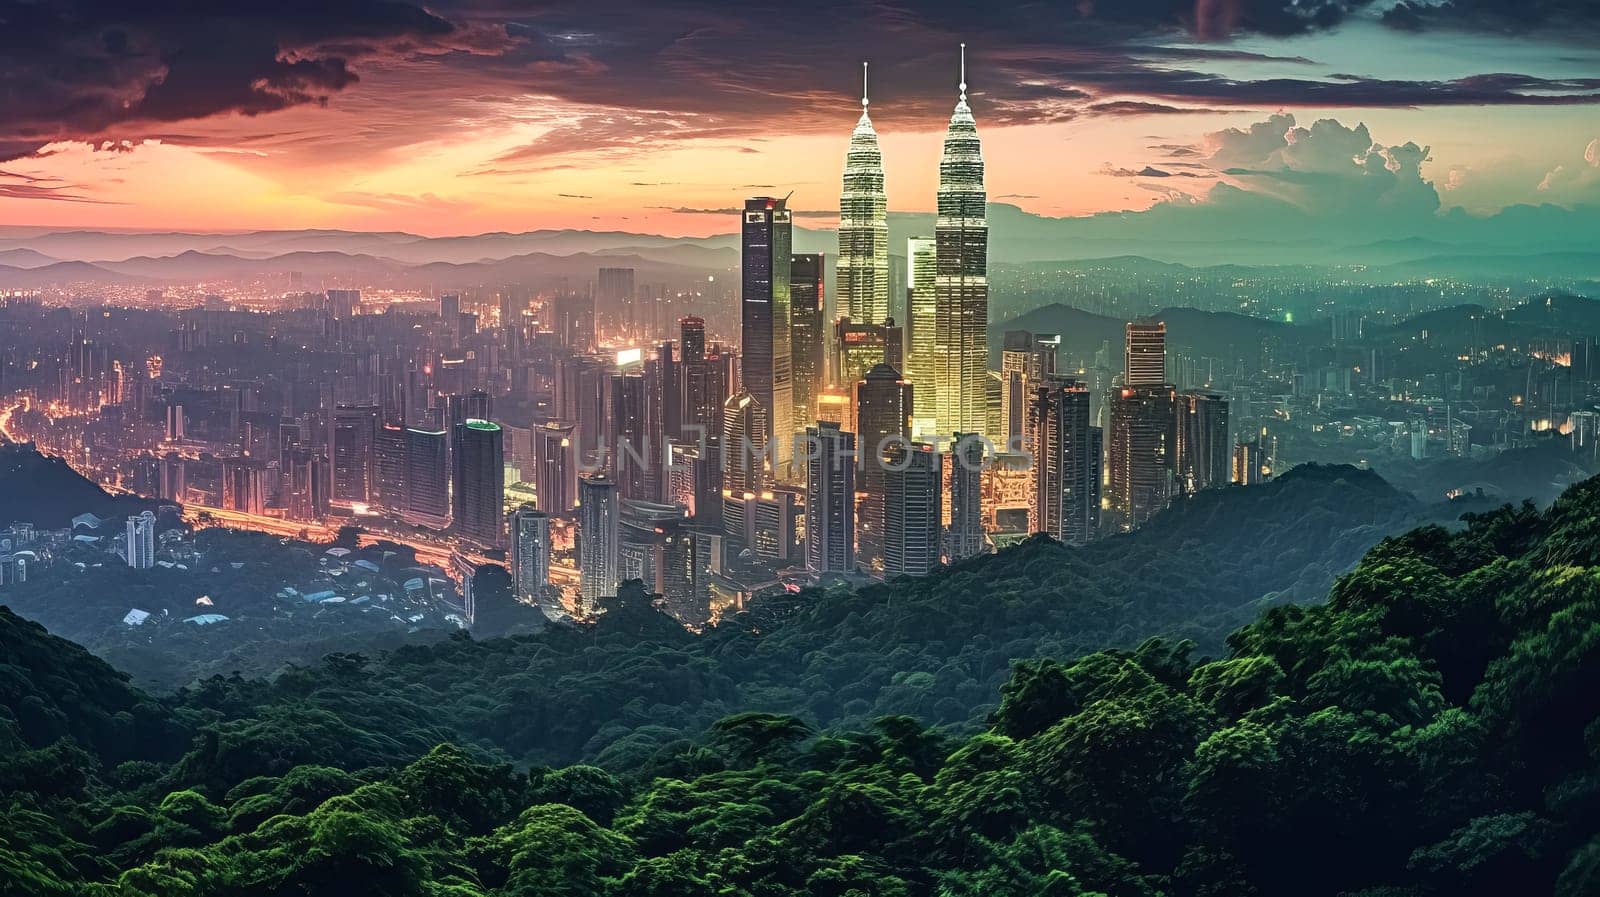 A city skyline is visible in the background of a lush green forest. The city is lit up at night, creating a warm and inviting atmosphere. The contrast between the urban landscape